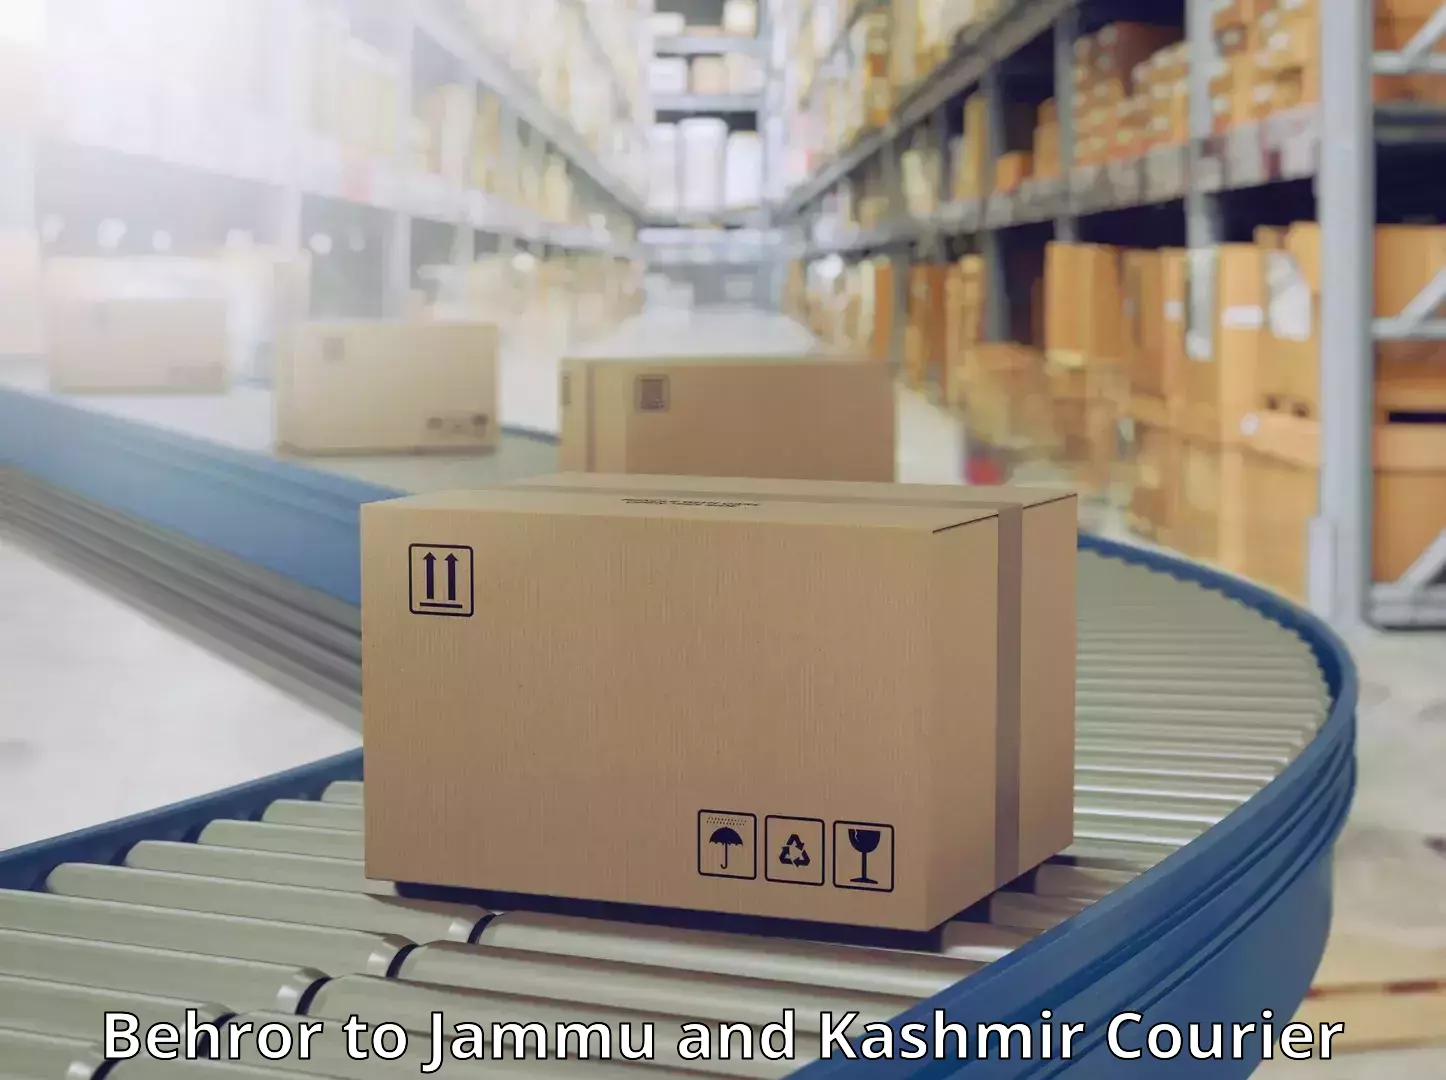 Courier service efficiency Behror to Jammu and Kashmir